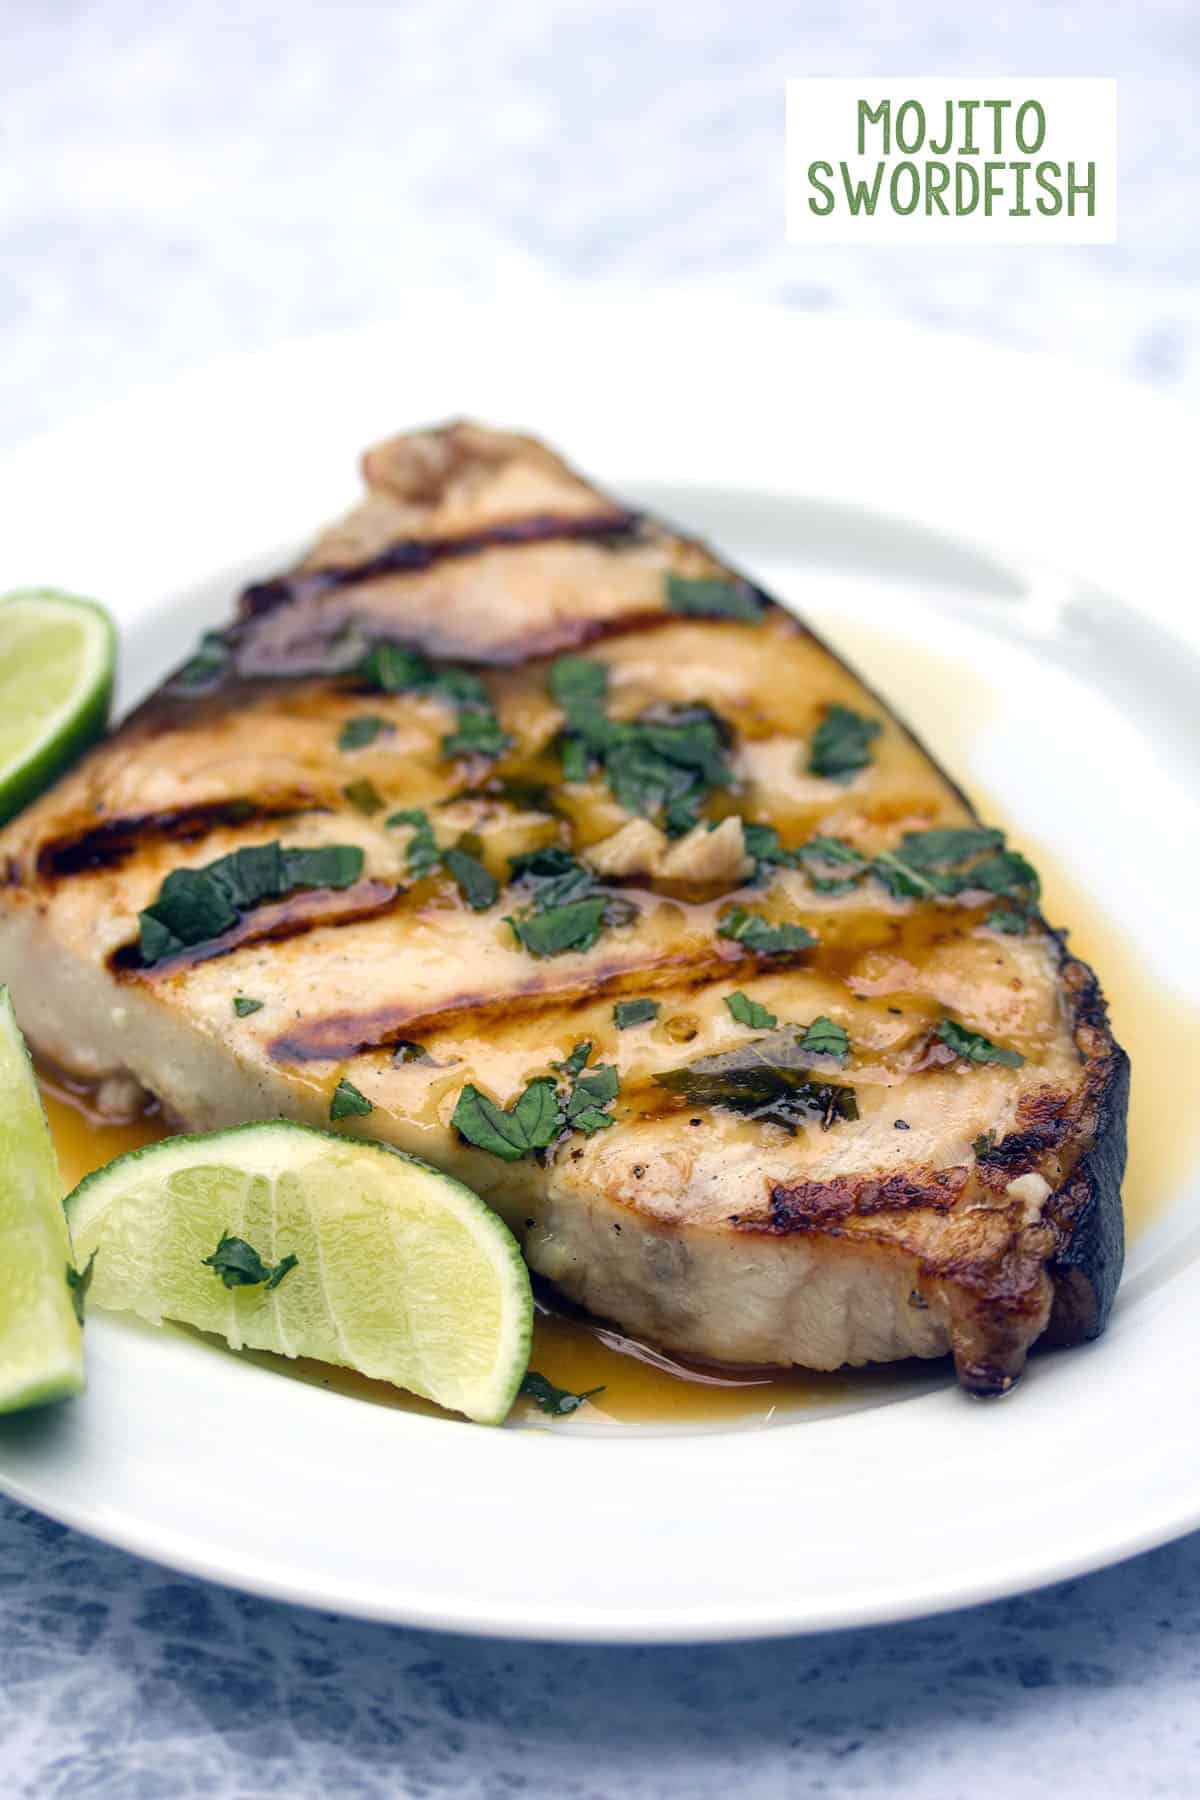 Head-on view of a piece of grilled mojito swordfish on a white plate topped with mint and surrounded by lime wedges with recipe title at top.